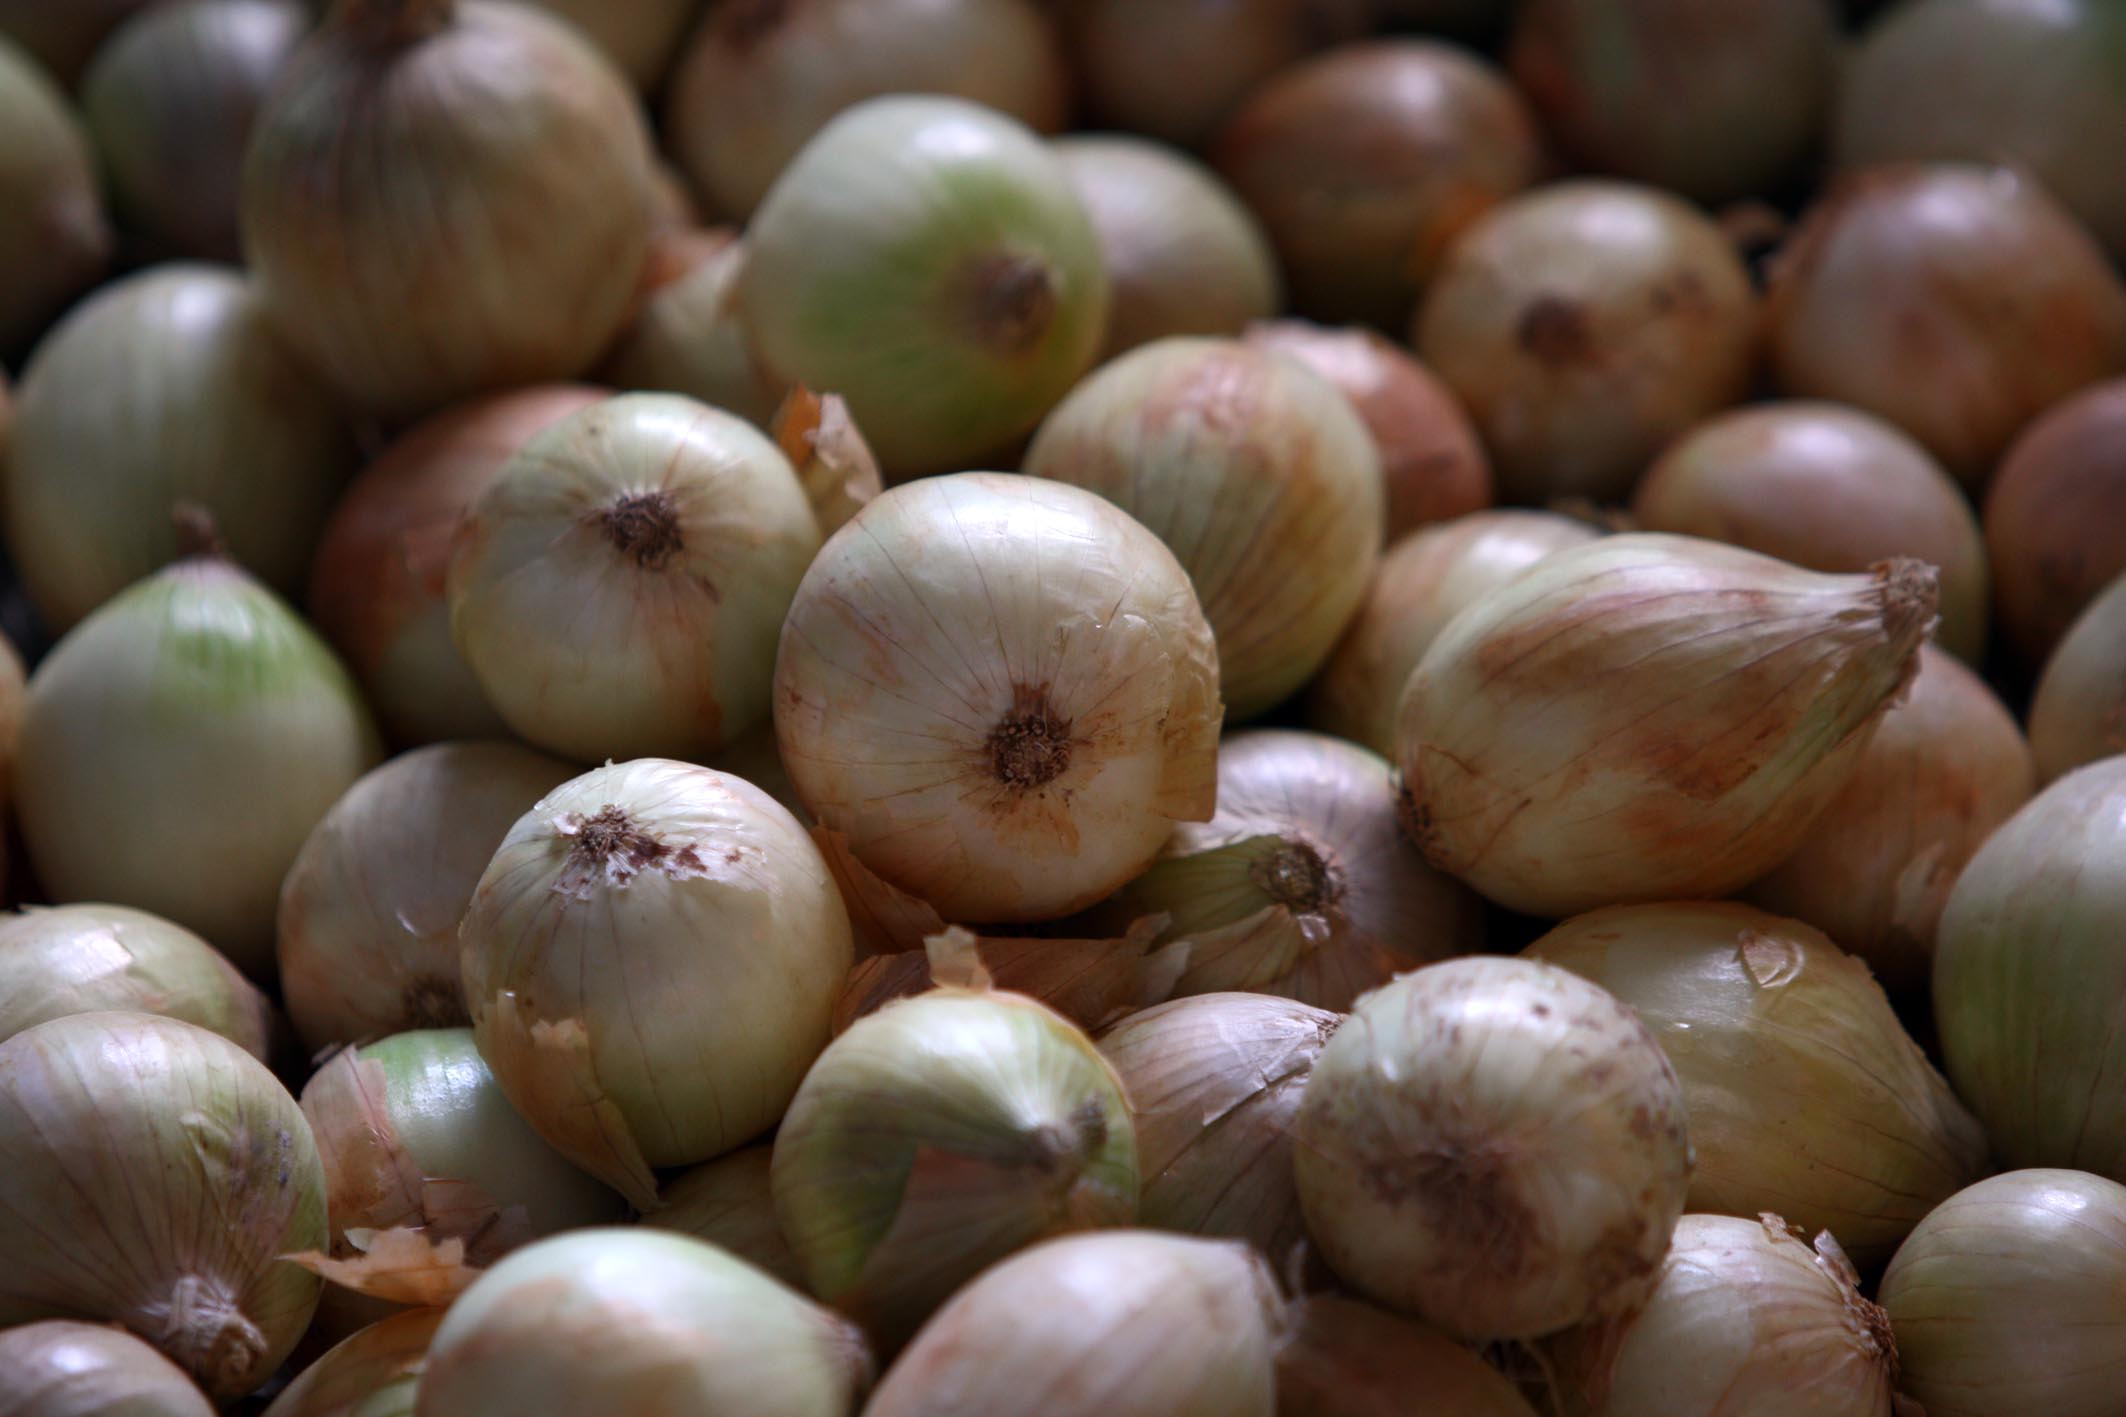 some onions piled up together with very little dirt on them